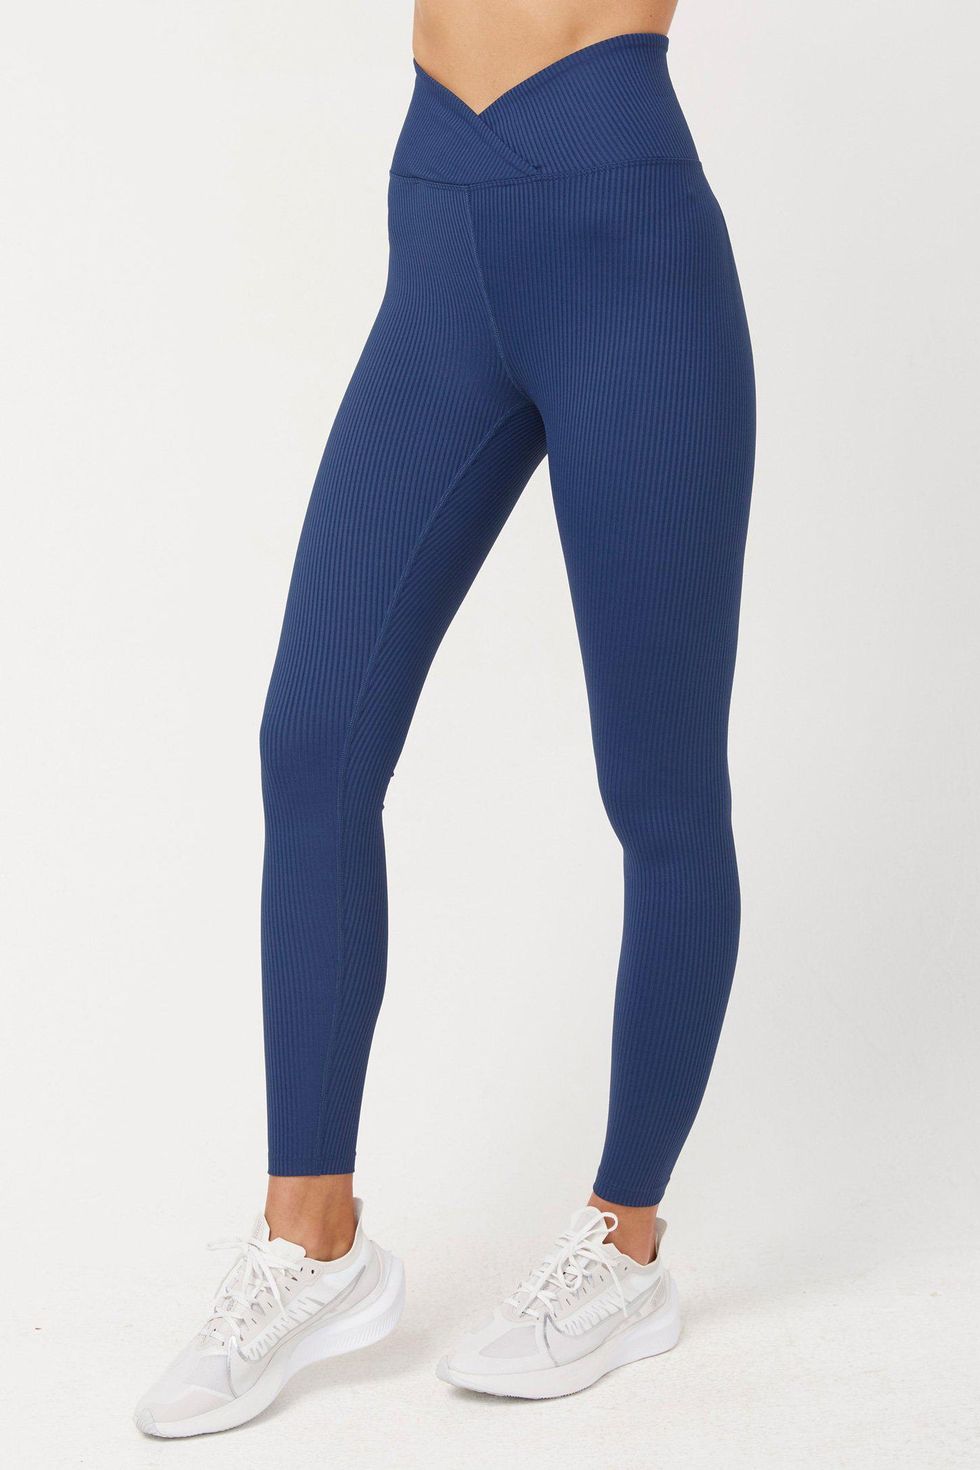 Putting In The Work Ribbed High Waisted Leggings (Sky Blue)